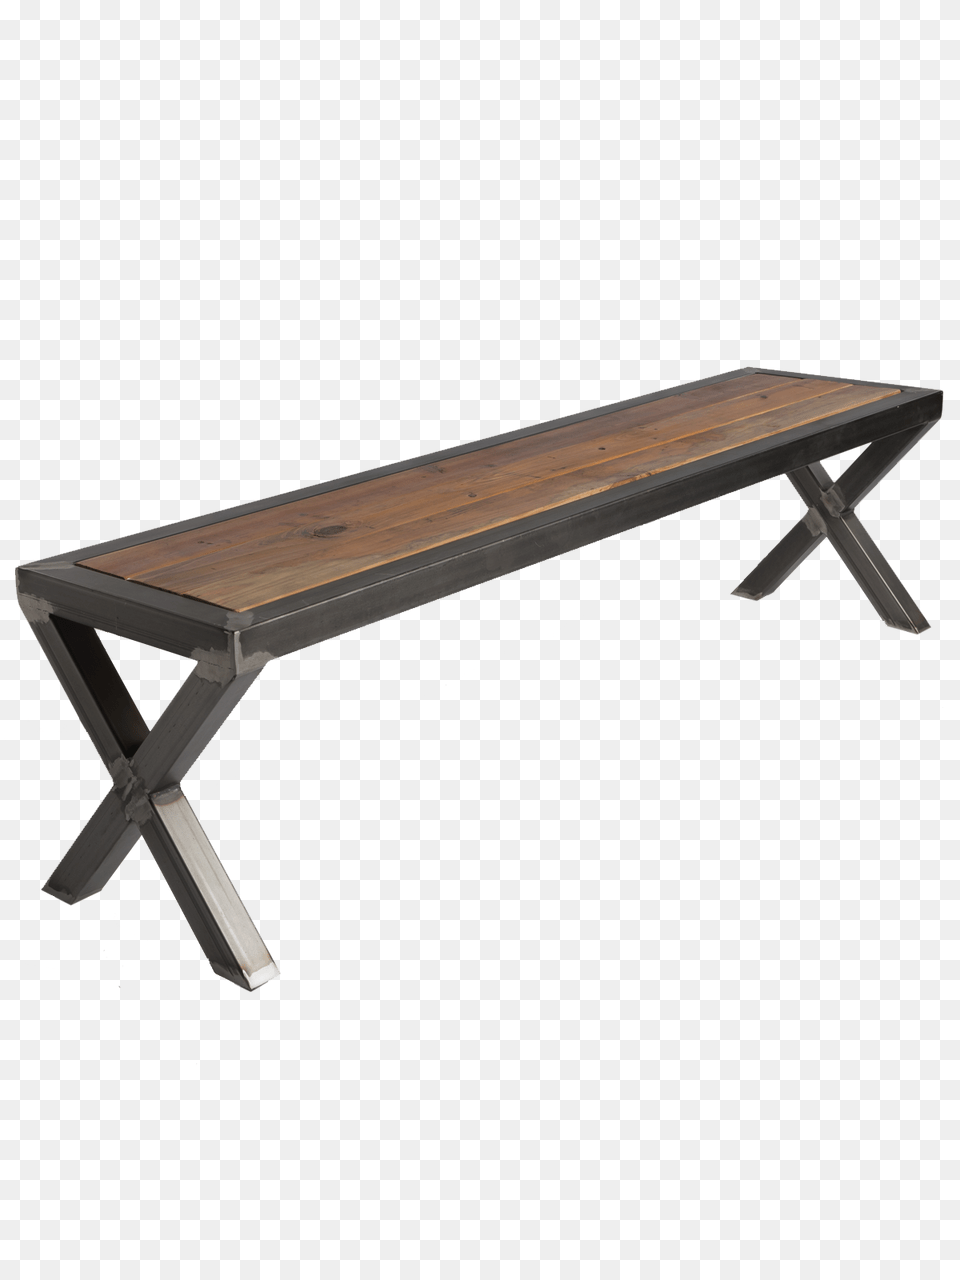 X Base Bench Tradesmith Goods, Coffee Table, Furniture, Table, Dining Table Png